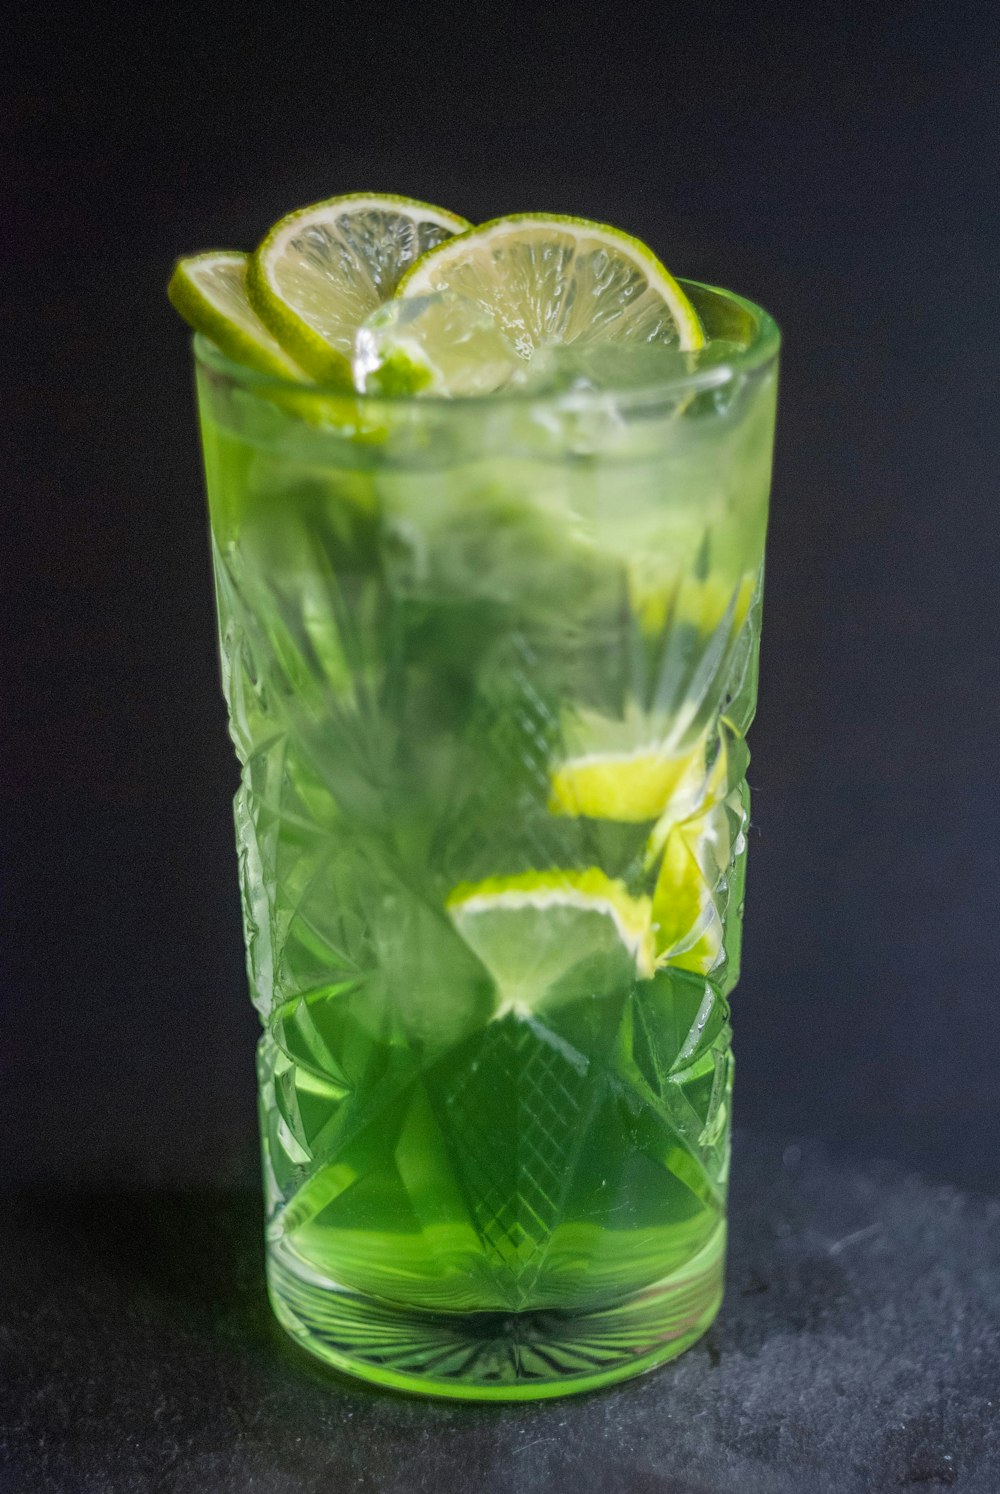 a green drink with limes and mints in a glass